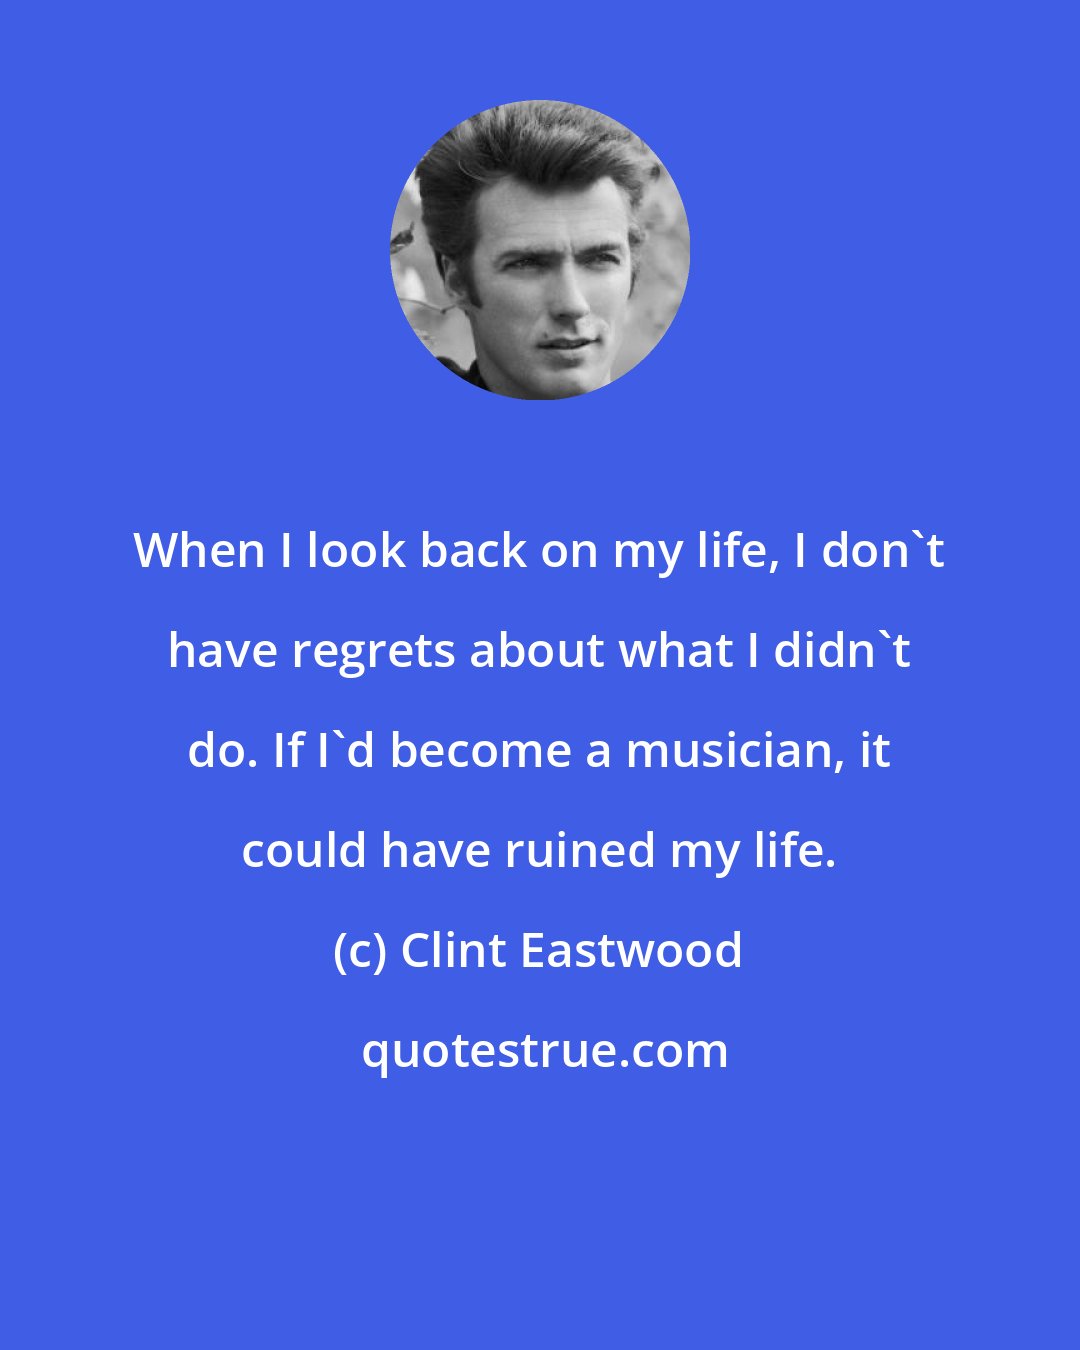 Clint Eastwood: When I look back on my life, I don't have regrets about what I didn't do. If I'd become a musician, it could have ruined my life.